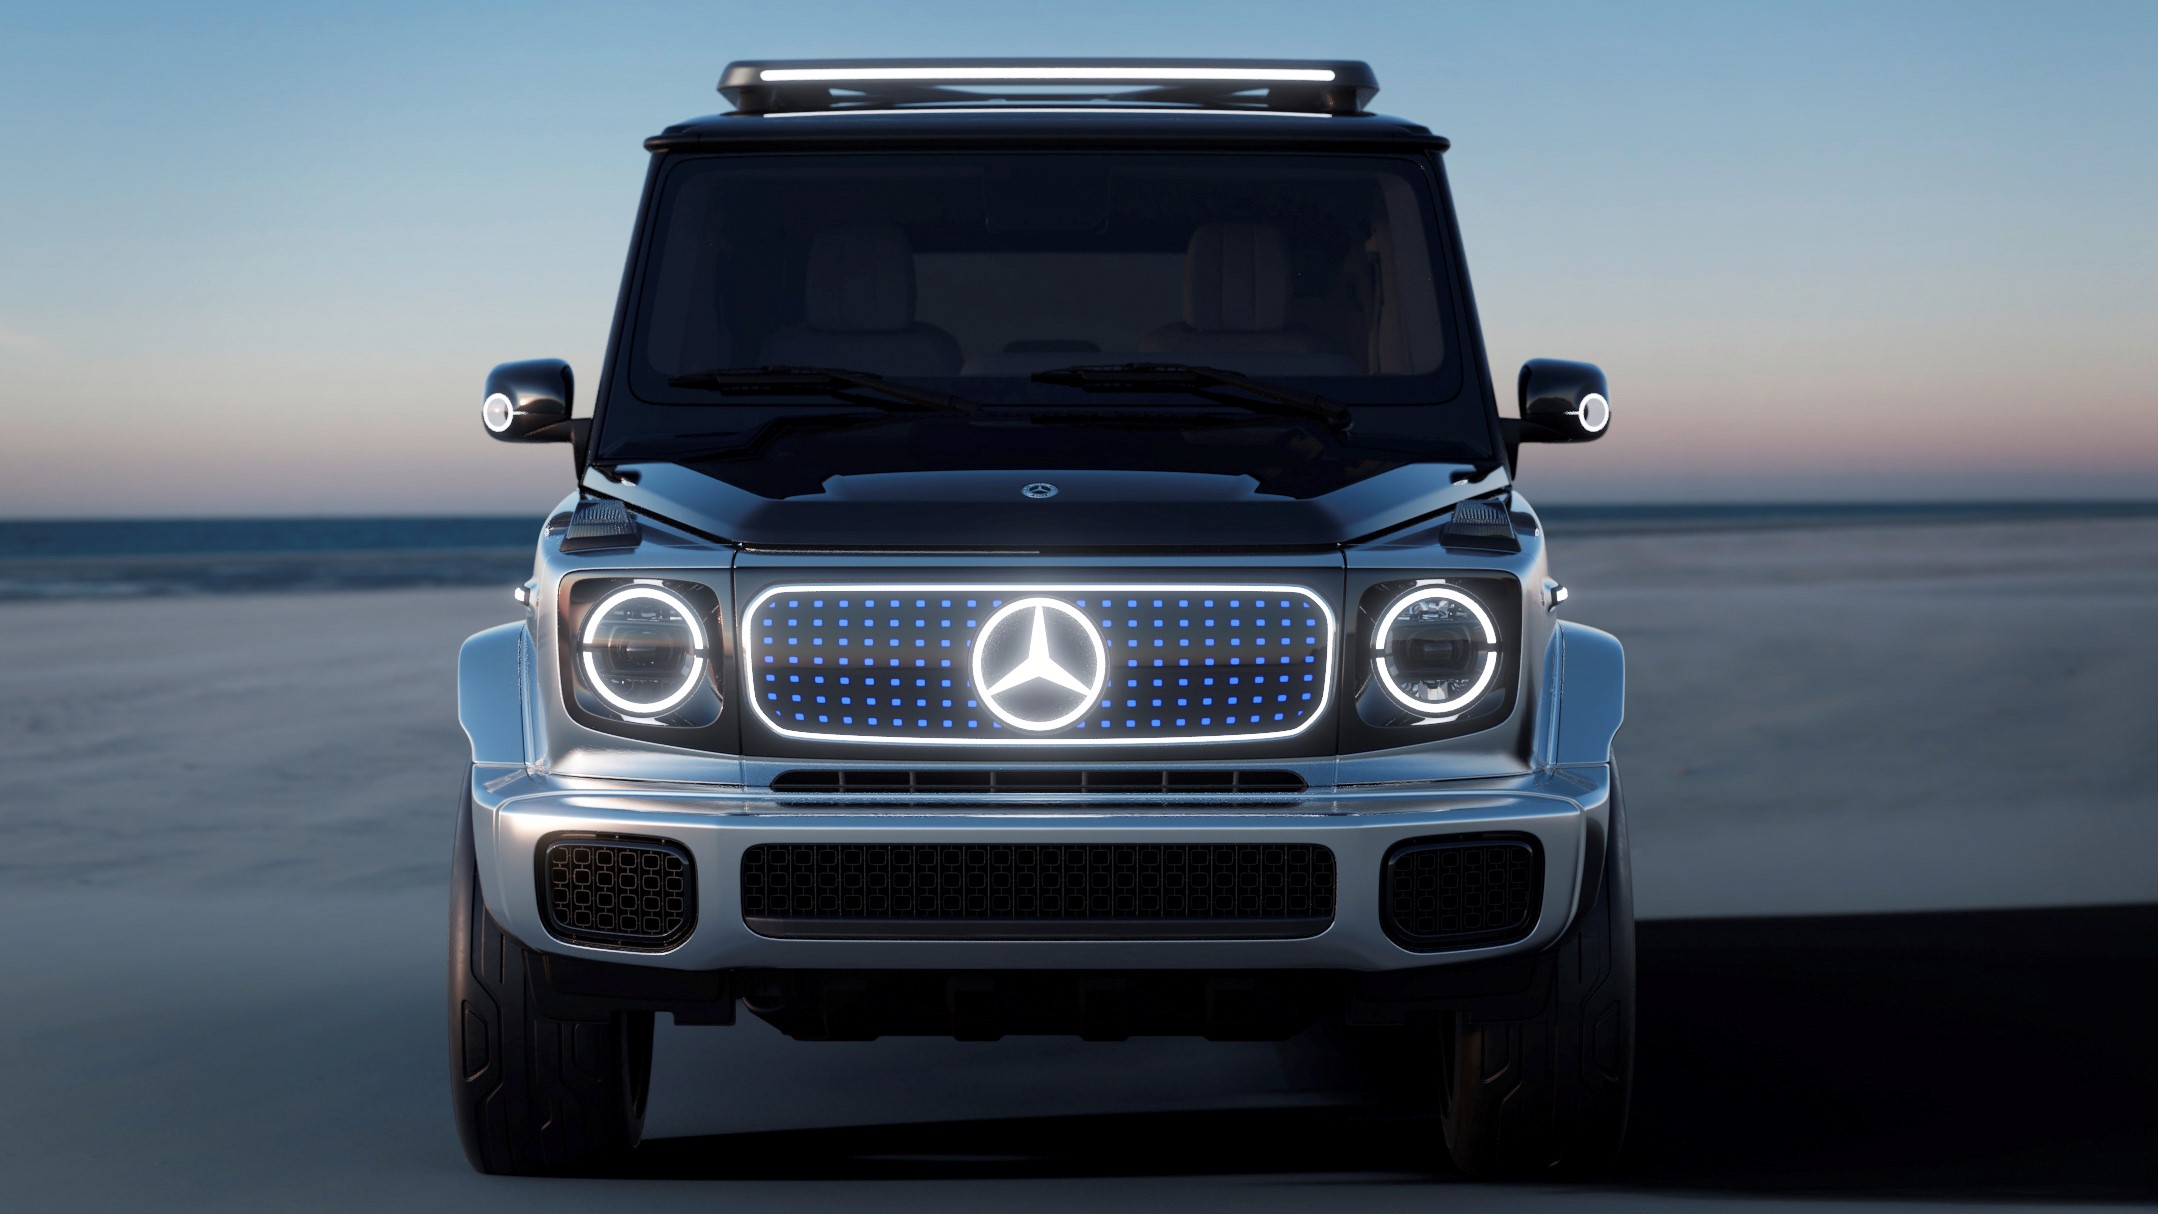 G-Wagen goes electric: this is the Mercedes EQG concept